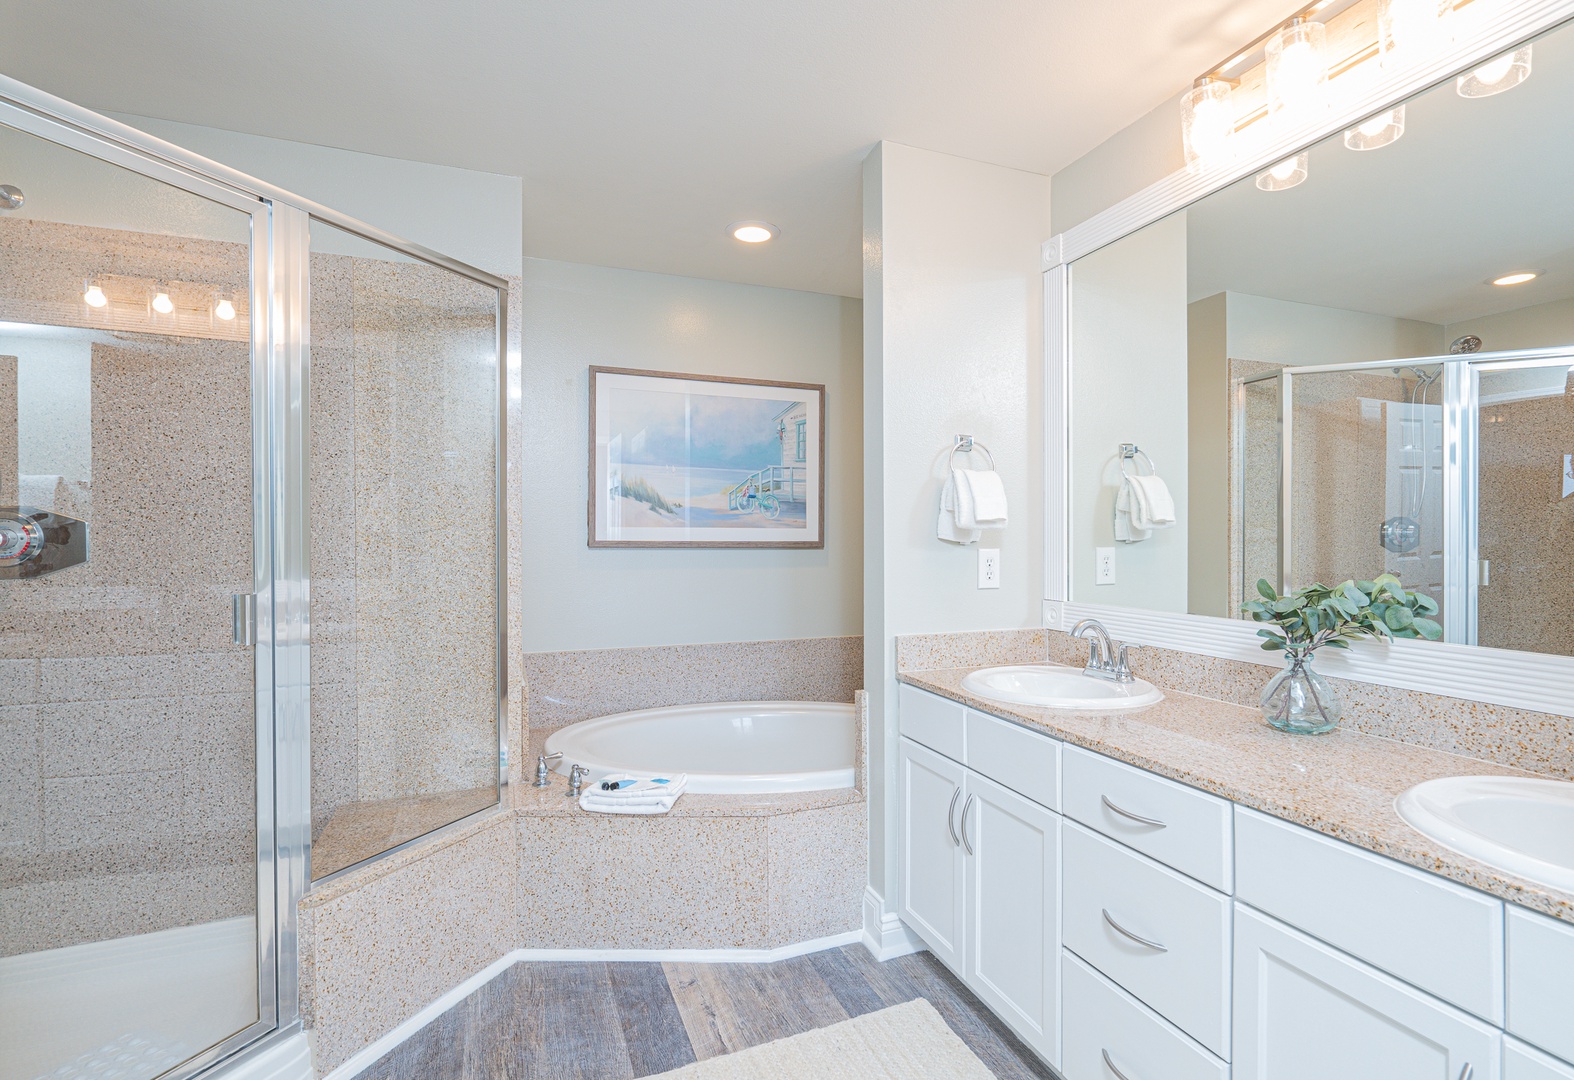 The king ensuite features a dual vanity, glass shower, & soaking tub